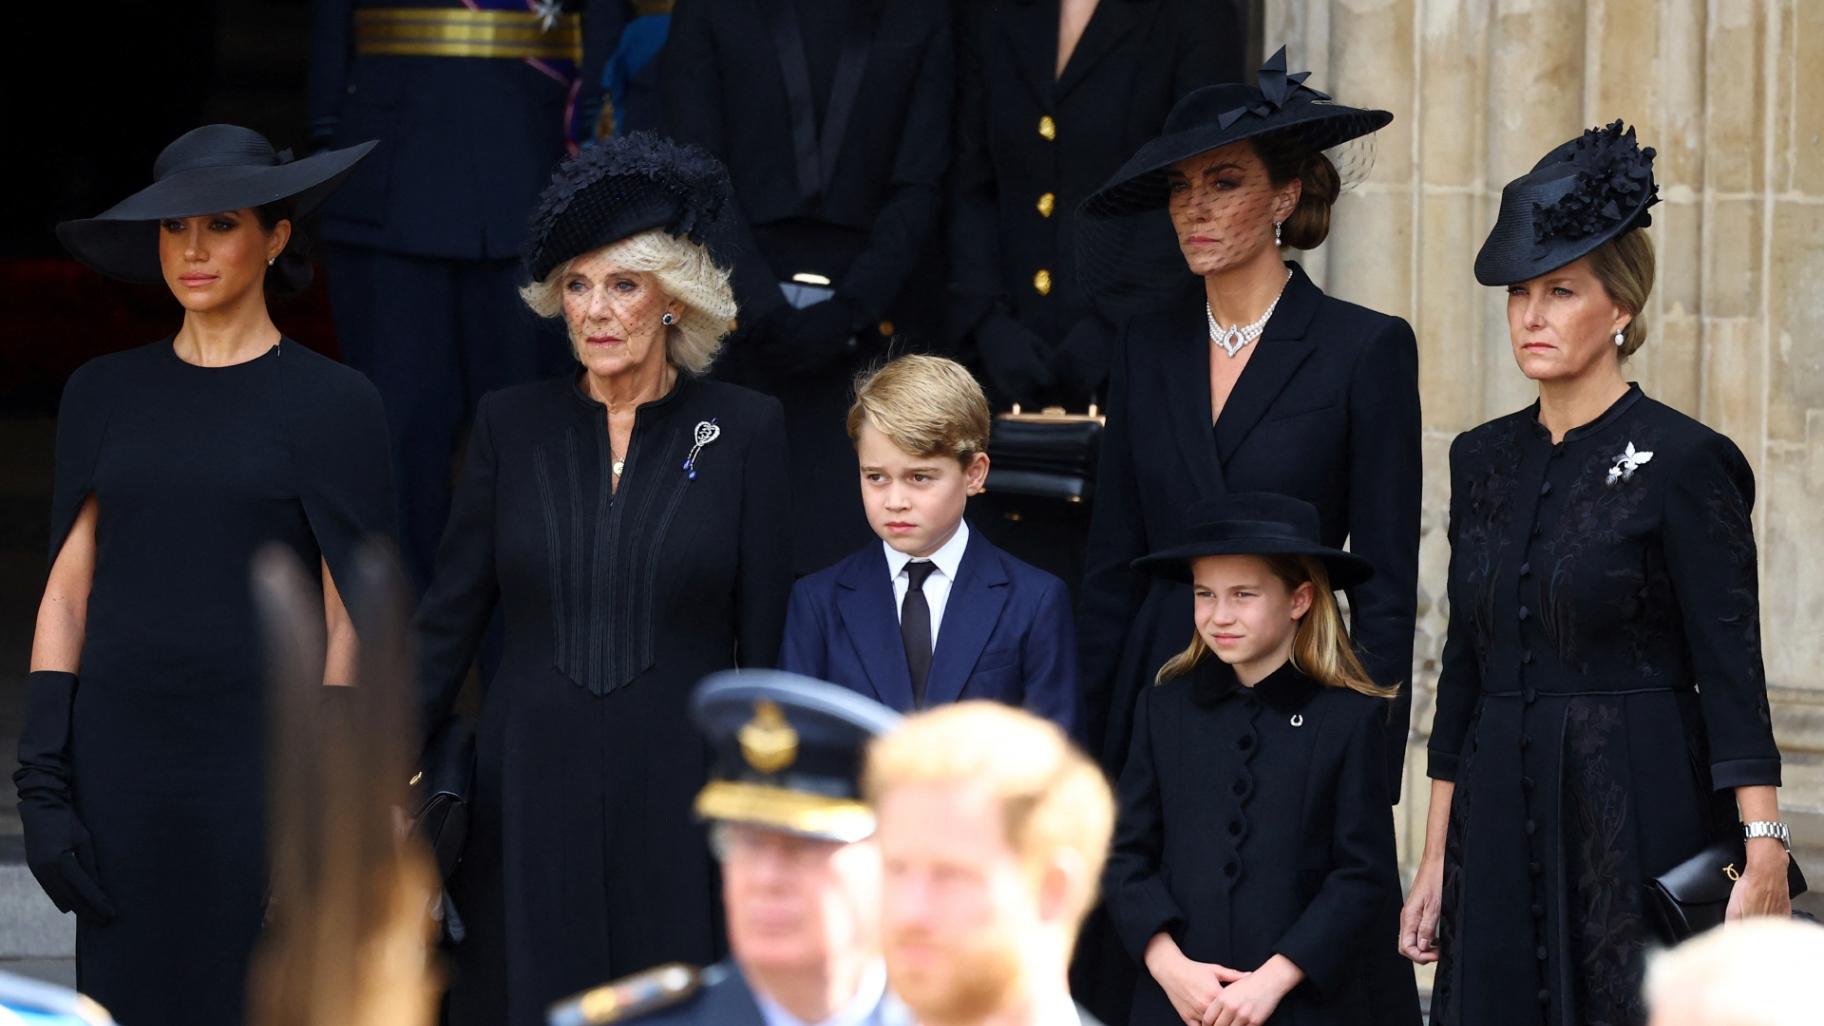 Camilla, Queen Consort, Prince George, Princess Charlotte, Kate, Princess of Wales, Meghan, Duchess of Sussex and Sophie, Countess of Wessex stand after a service at Westminster Abbey on the day of the funeral of 'State and funeral of Britain's Queen Elizabeth in London, Monday, Sept. 19, 2022. (Hannah Mckay/Pool Photo via AP)